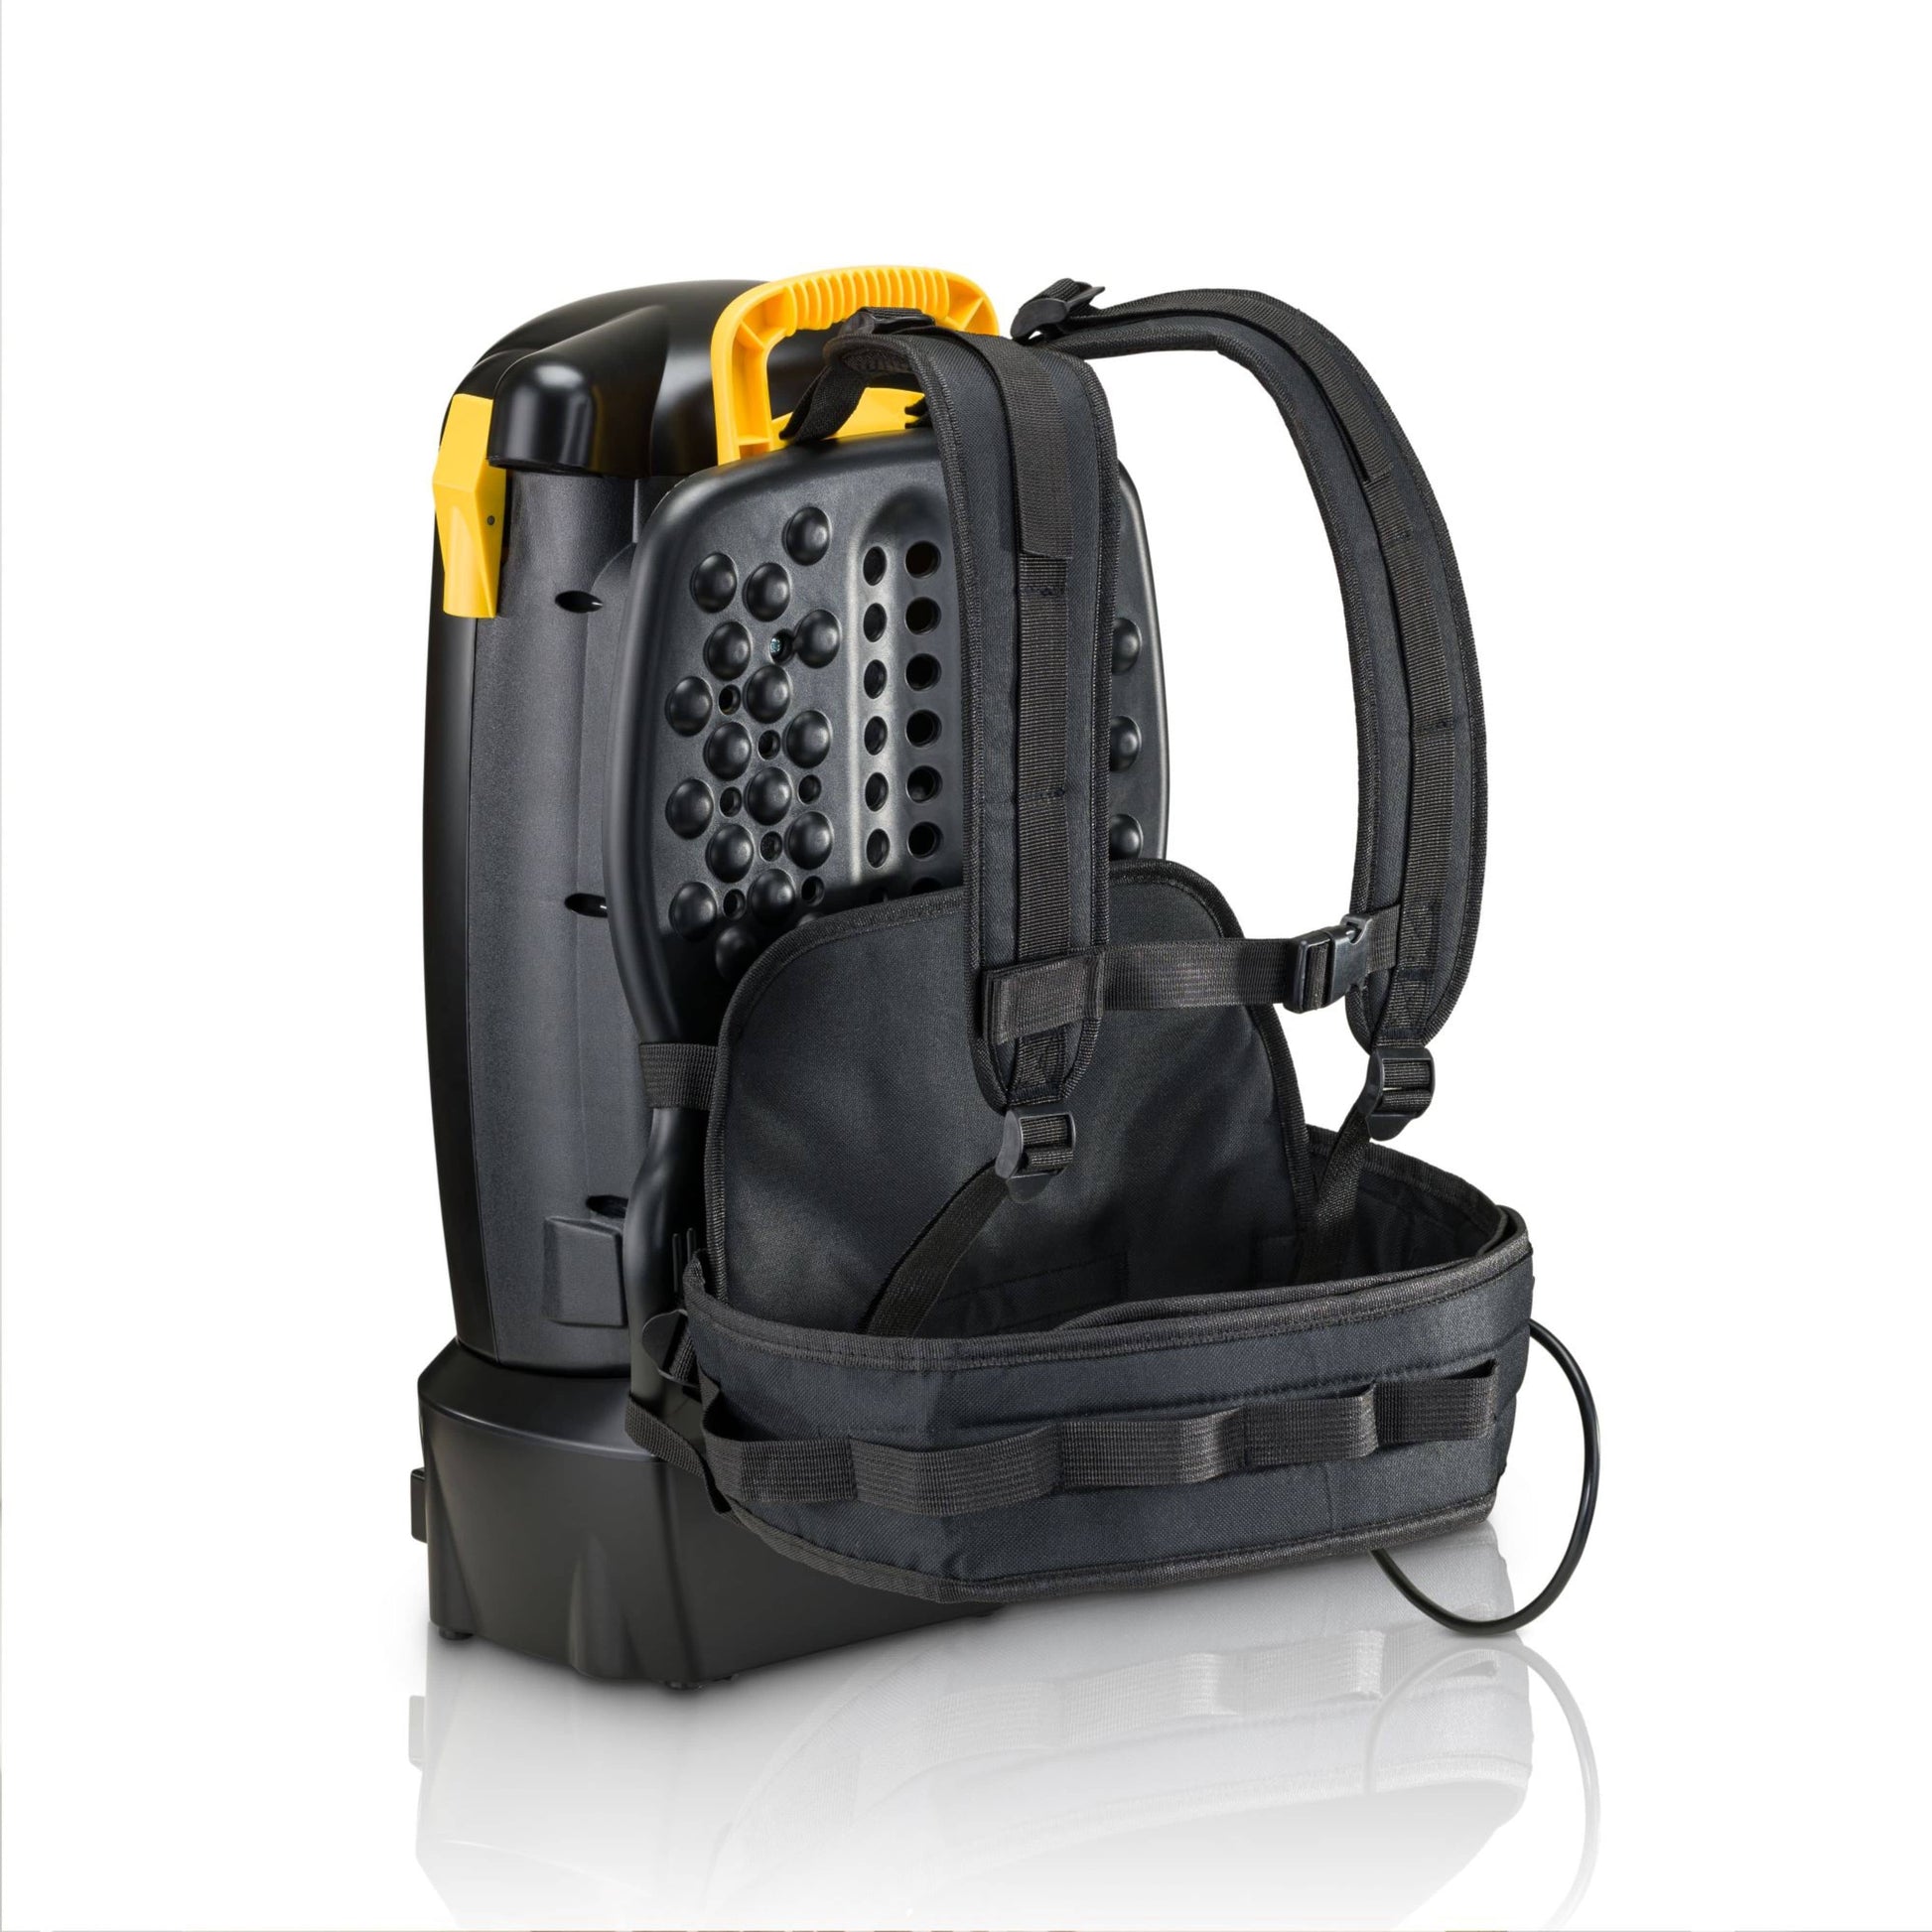 Prolux 8qt 1hr Lithium Battery Powered Backpack Vacuum with 2 Year Warranty